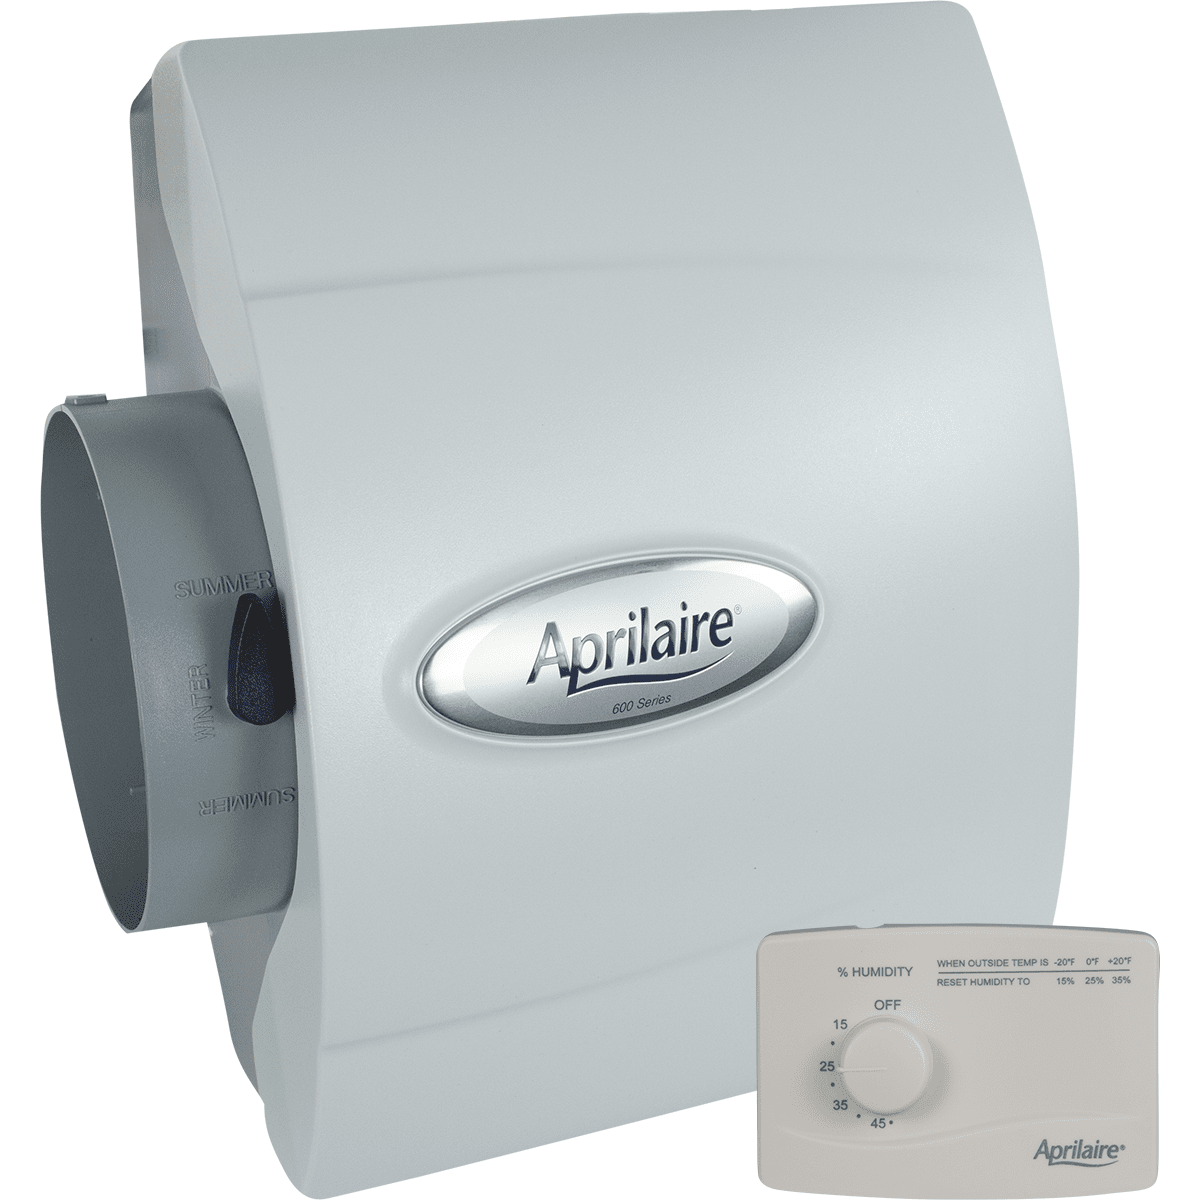 Aprilaire 600 Large Bypass Humidifier - Manual Control